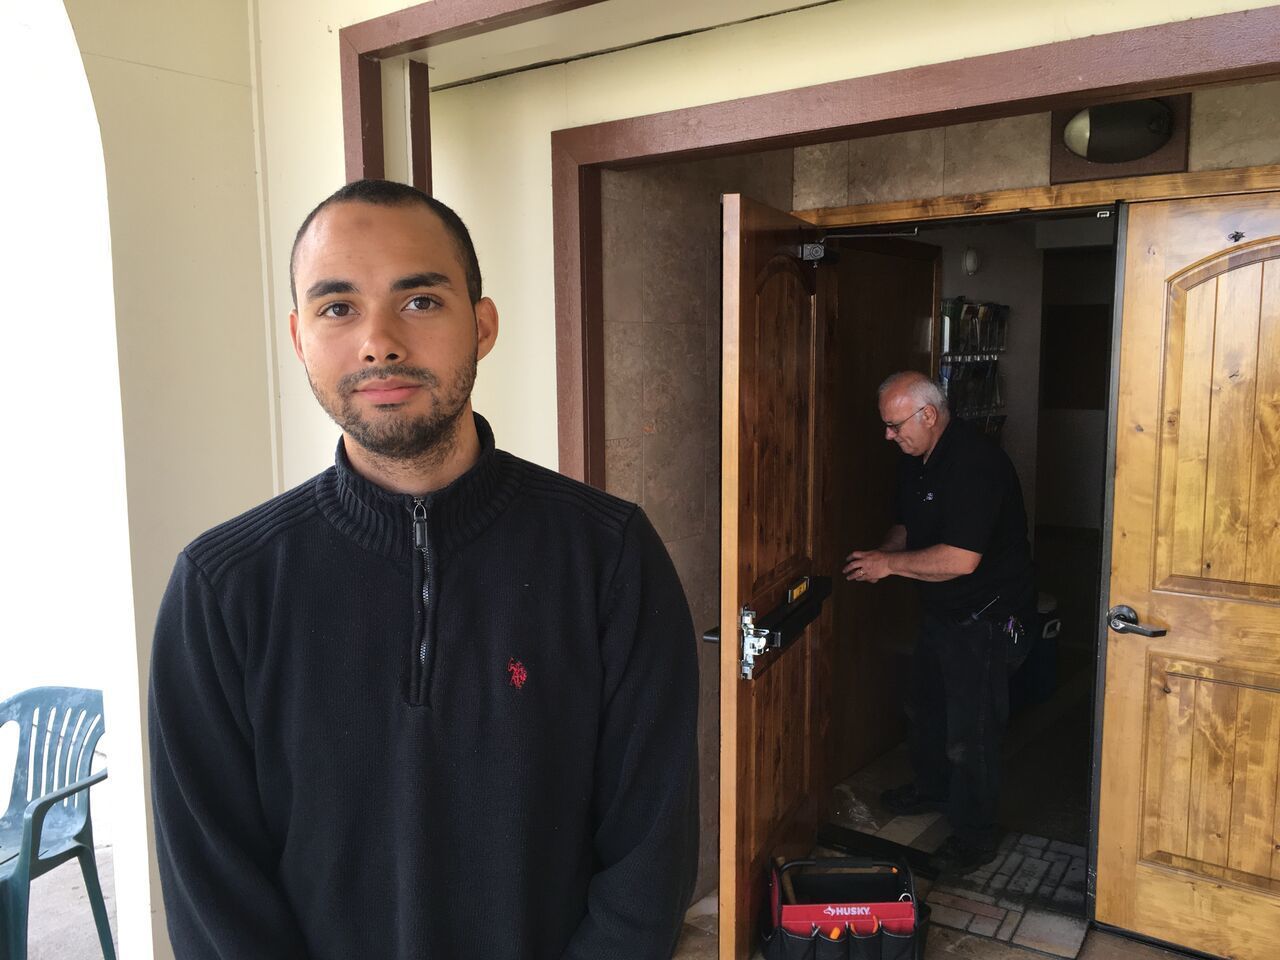 In this June 1, 2017, photo, Drew Williams, a member of the Eugene Islamic Center, poses for a portrait outside the building in Eugene, Ore., as locksmith Jim King upgrades the locks on the front doors. Williams said members of the mosque have been rattled by an incident in which a man showed up and allegedly threatened to kill worshippers, but that the community has shown concern and support.